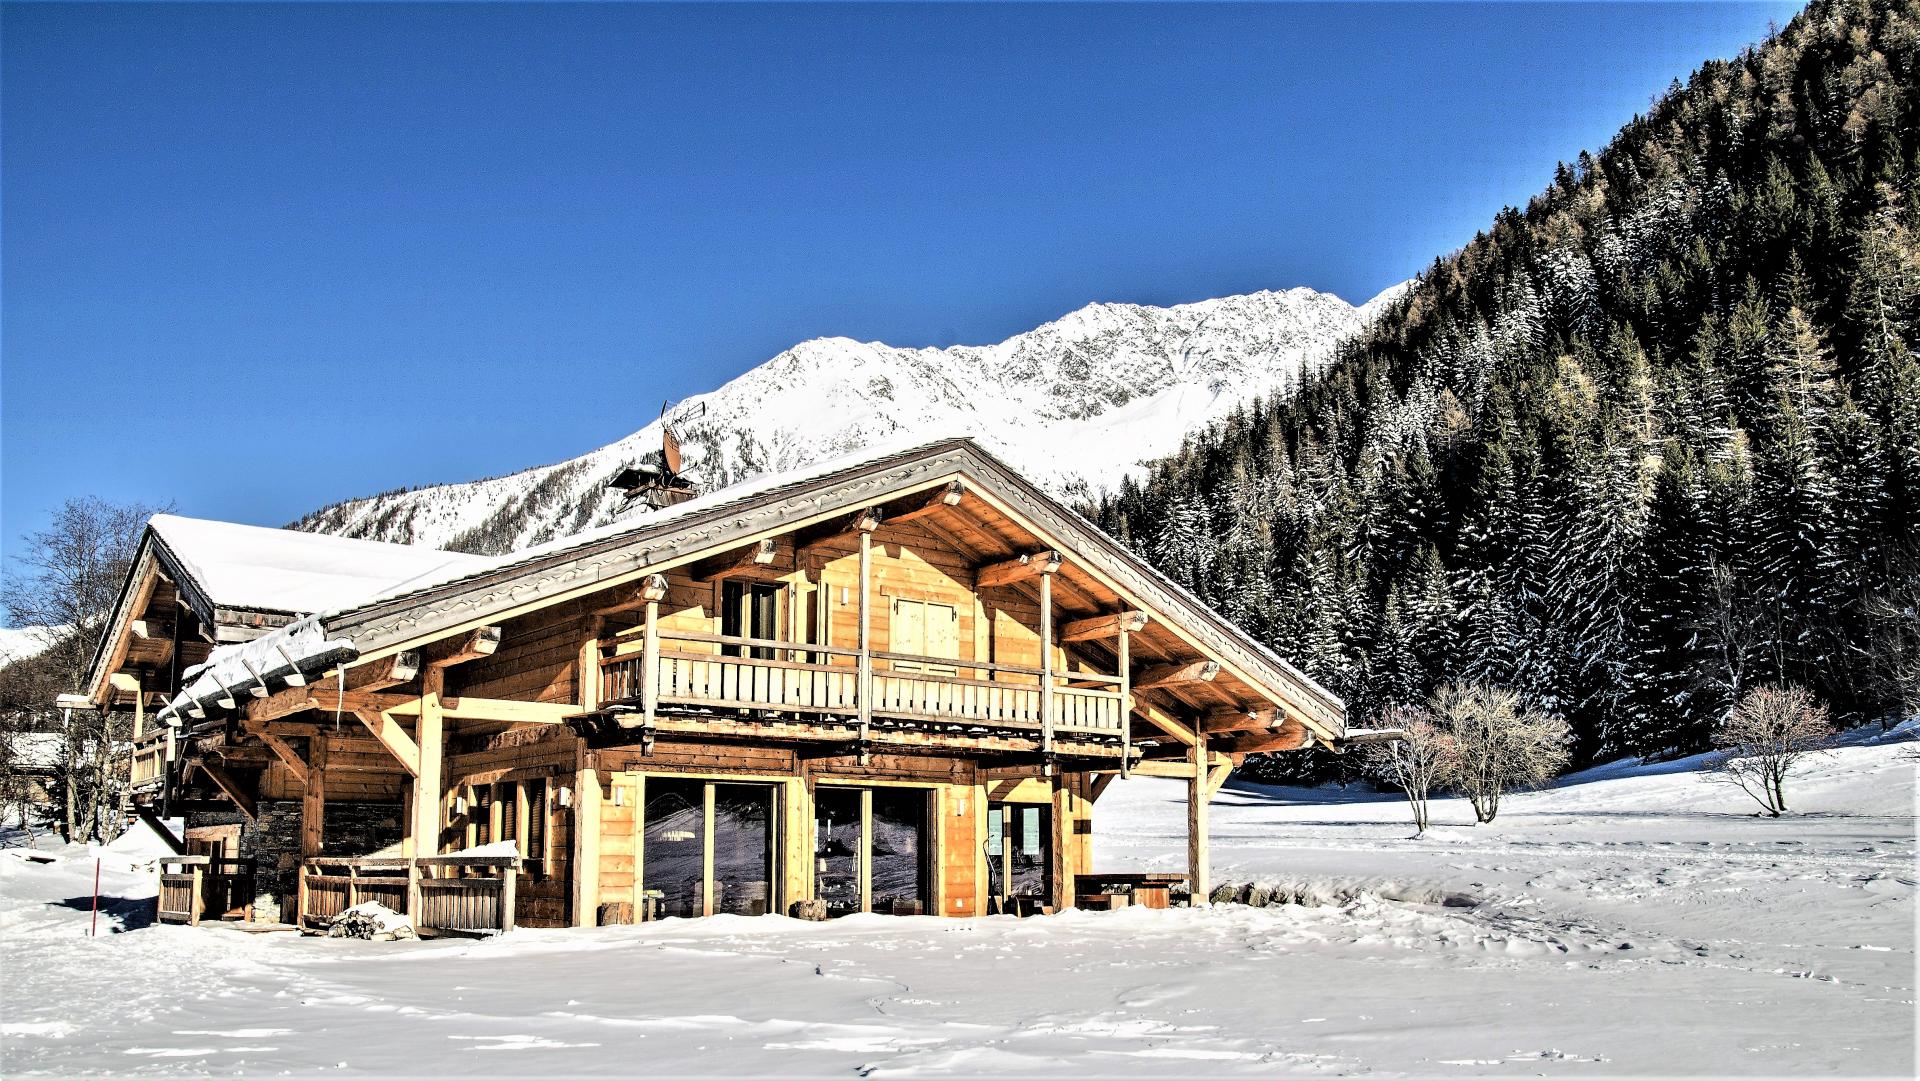 IN THE VALLEY OF CHAMONIX, A NICE SKI HOLIDAY CHALET